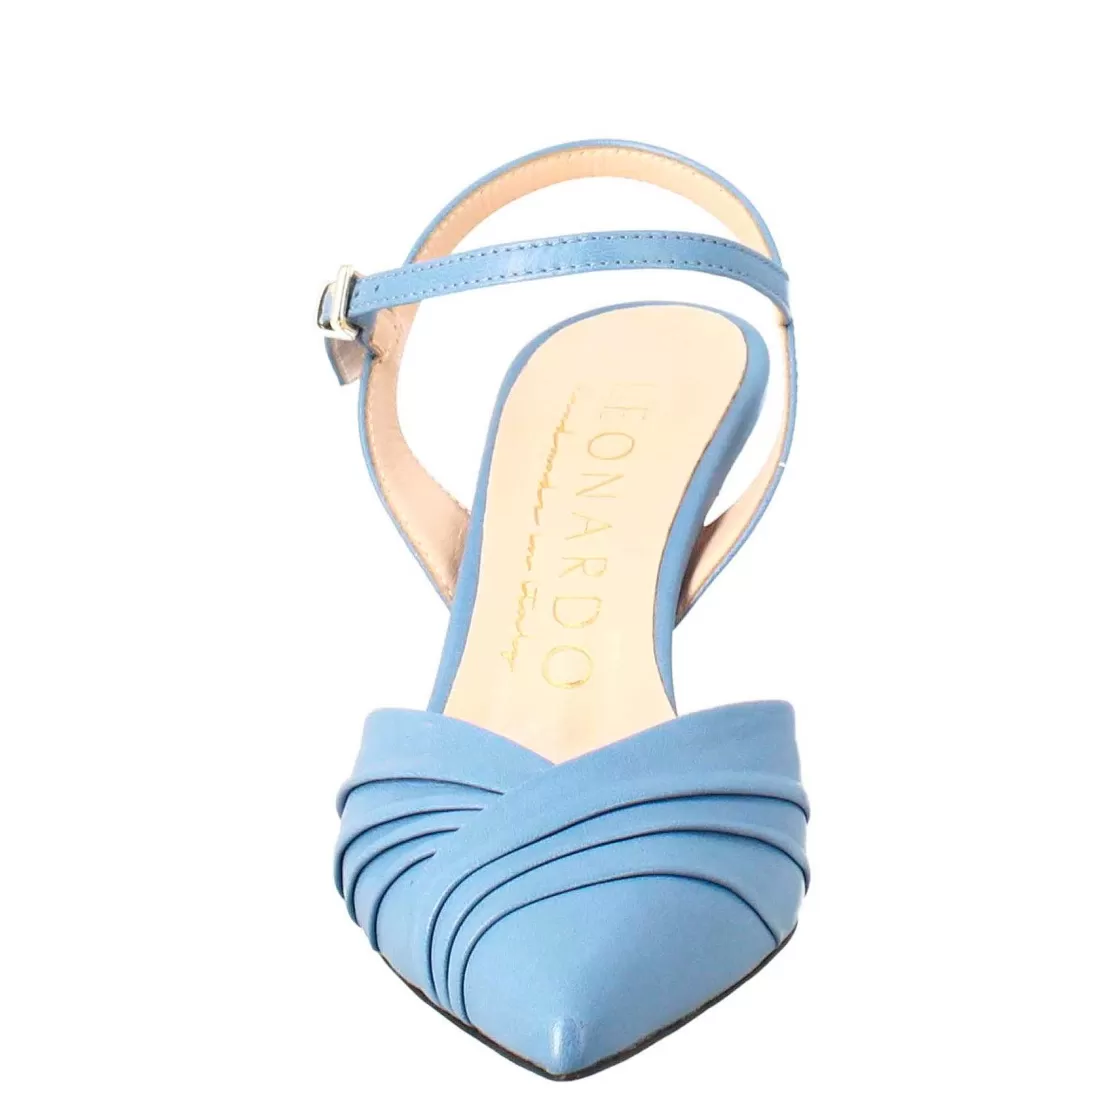 Leonardo Woman'S Pointed Toe Sandal In Light Blue Pleated Leather With High Heel Outlet